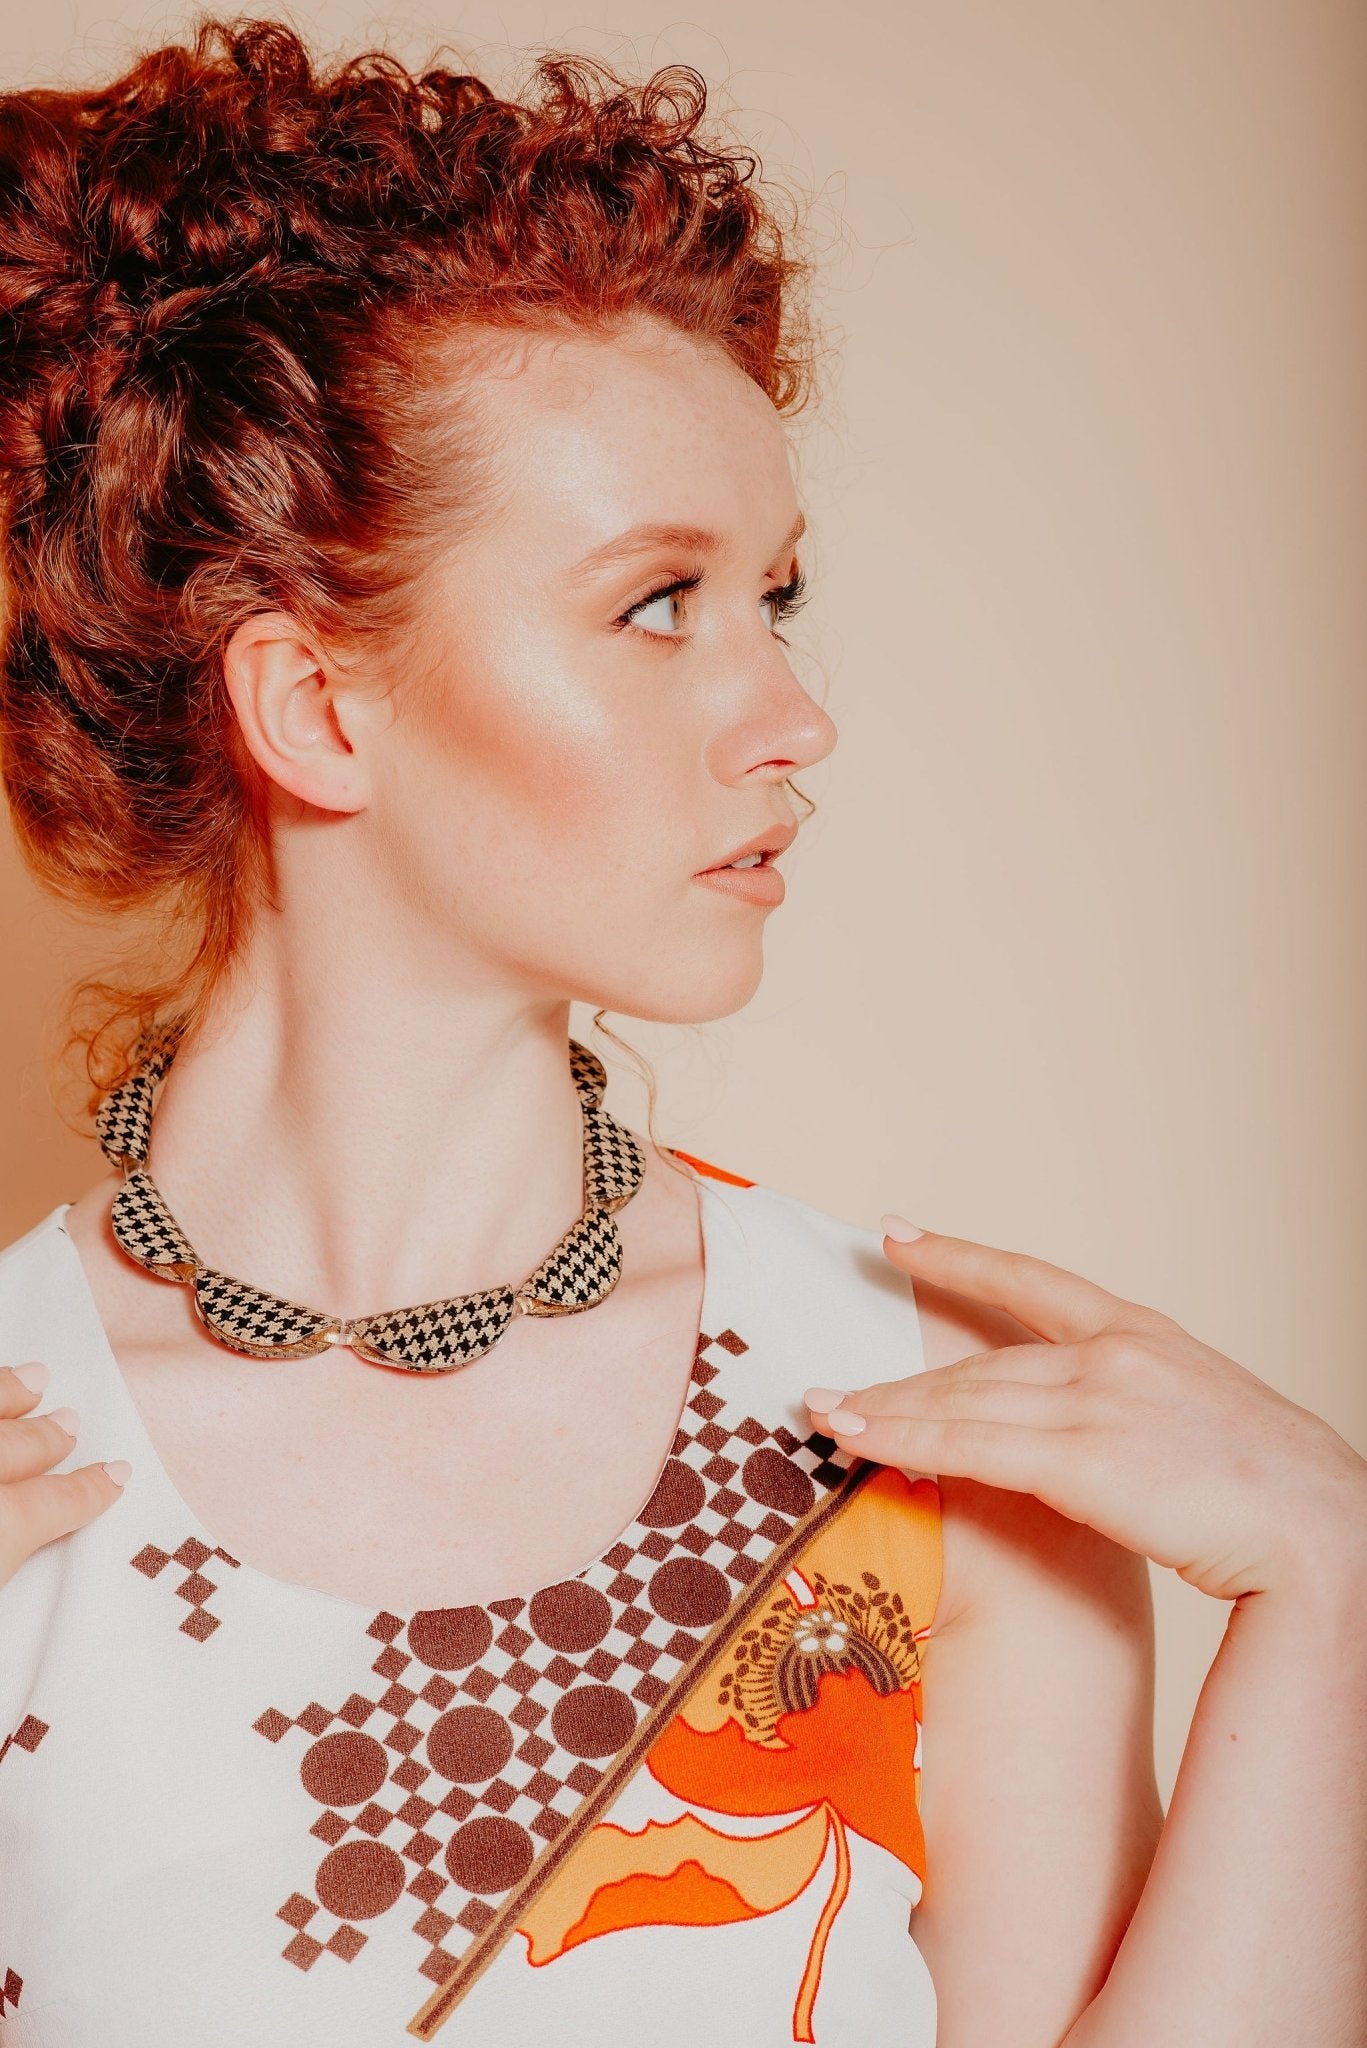 Houndstooth necklace and cuff by Mojiana designs - Natalia Willmott